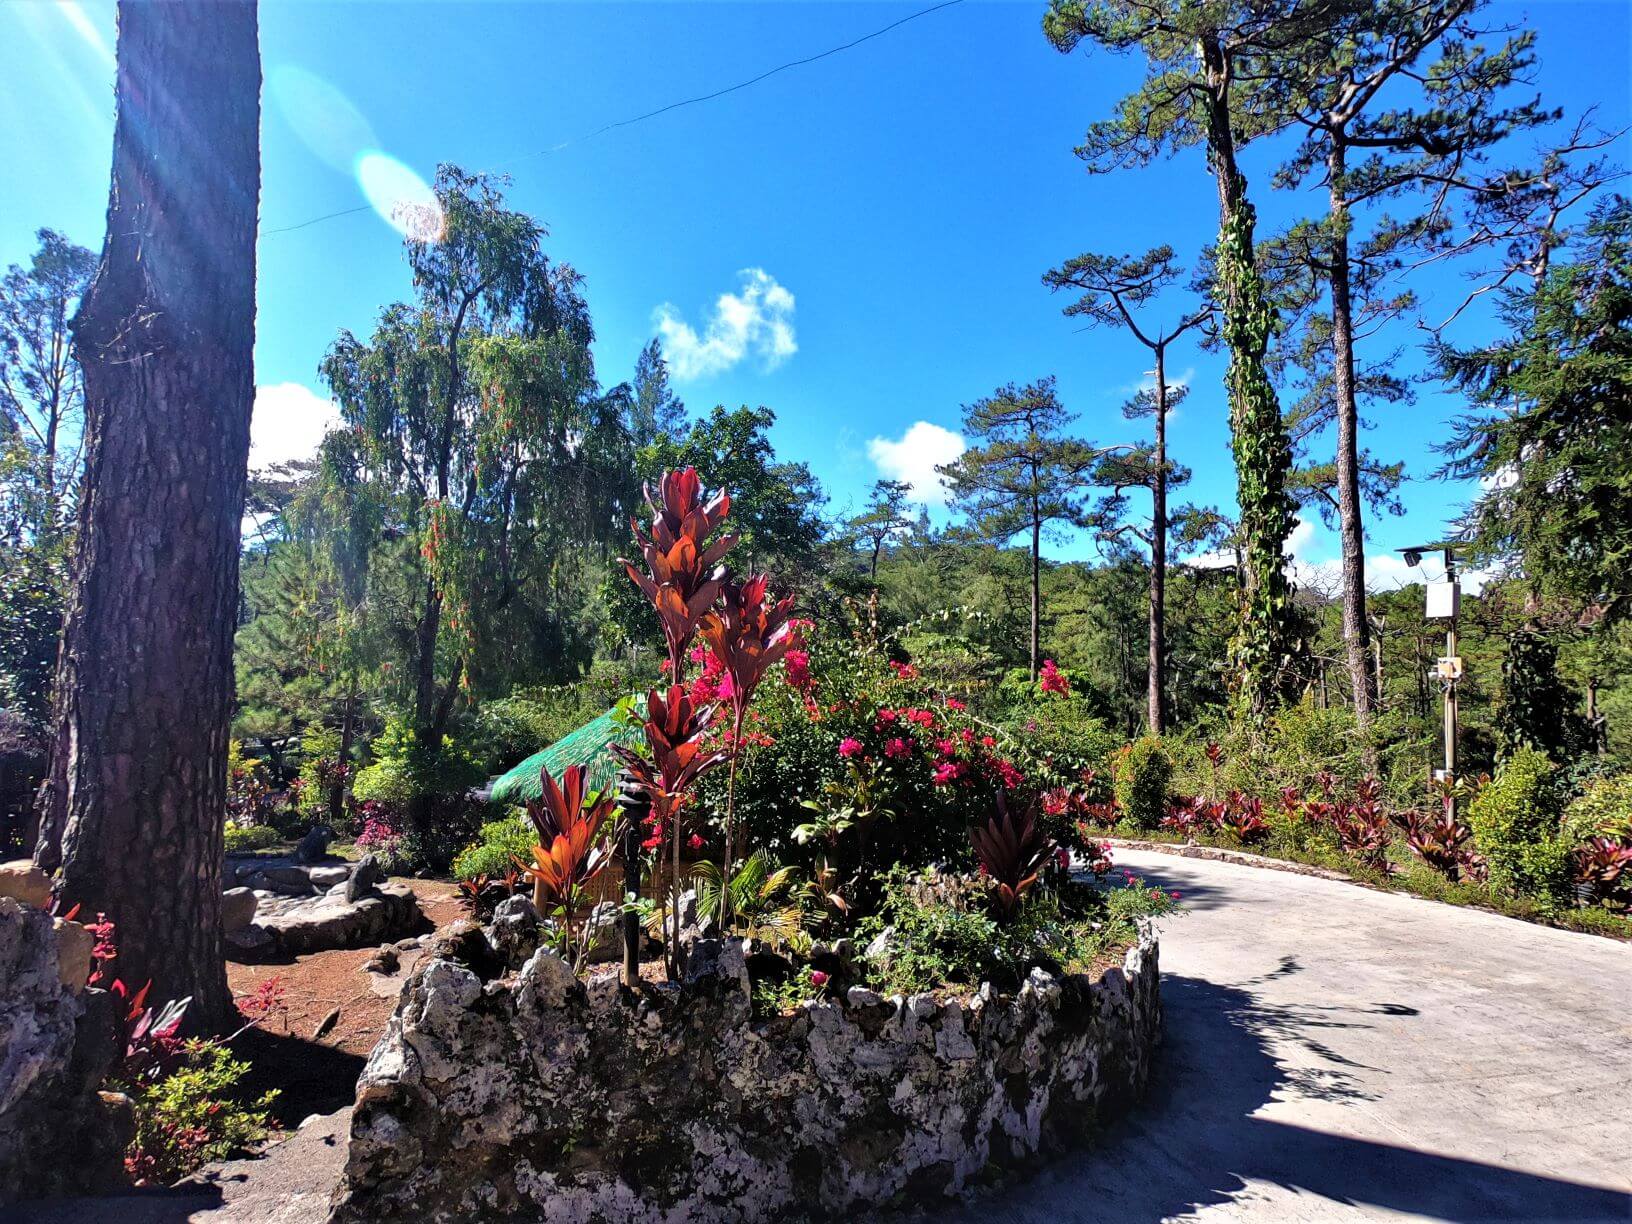 Hotel View in Baguio, pines and flowers